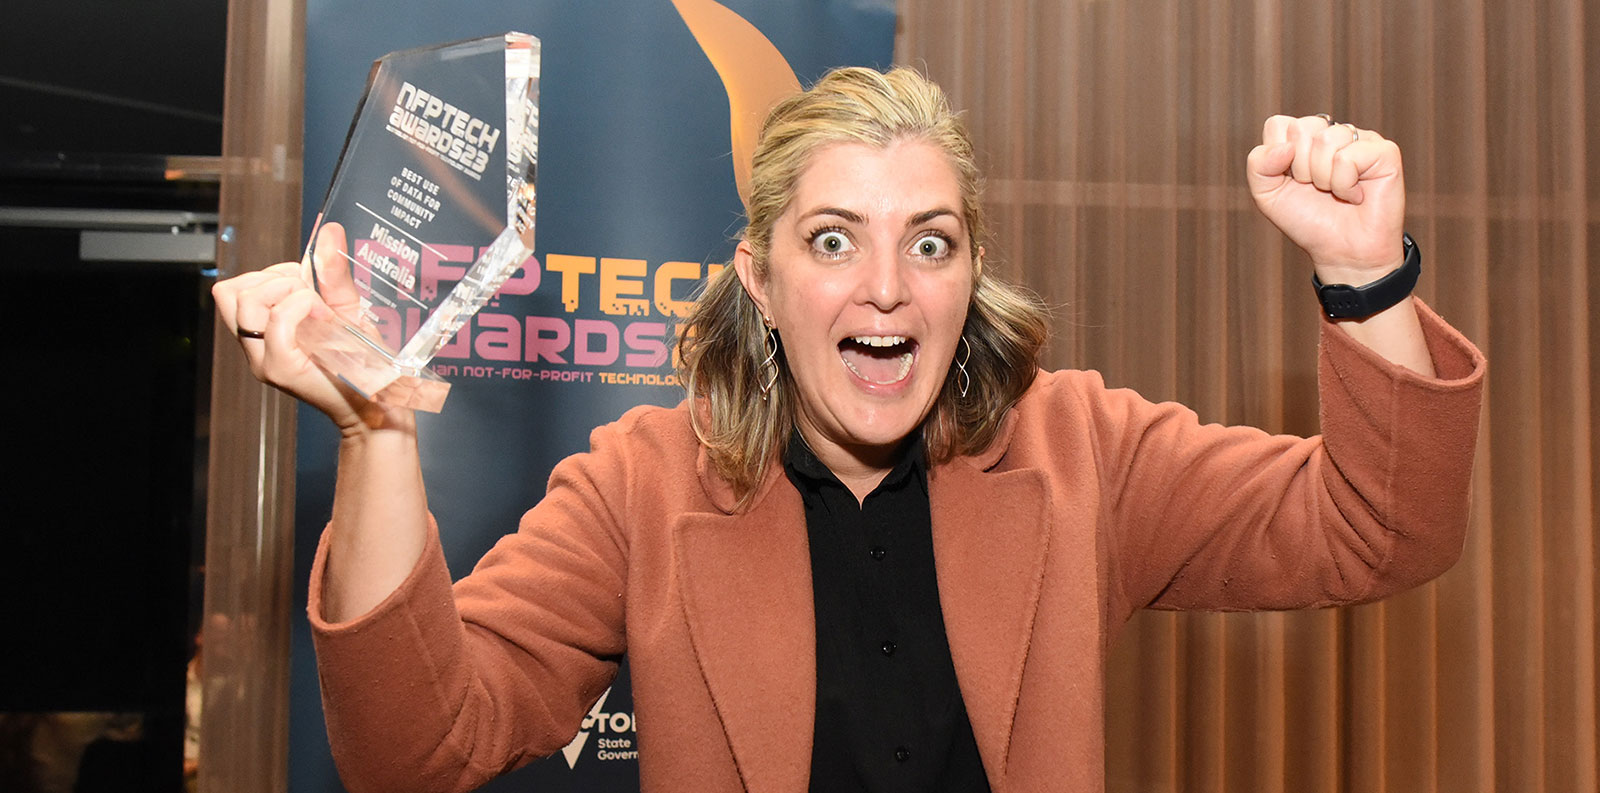 Photo of woman holding award and celebrating win